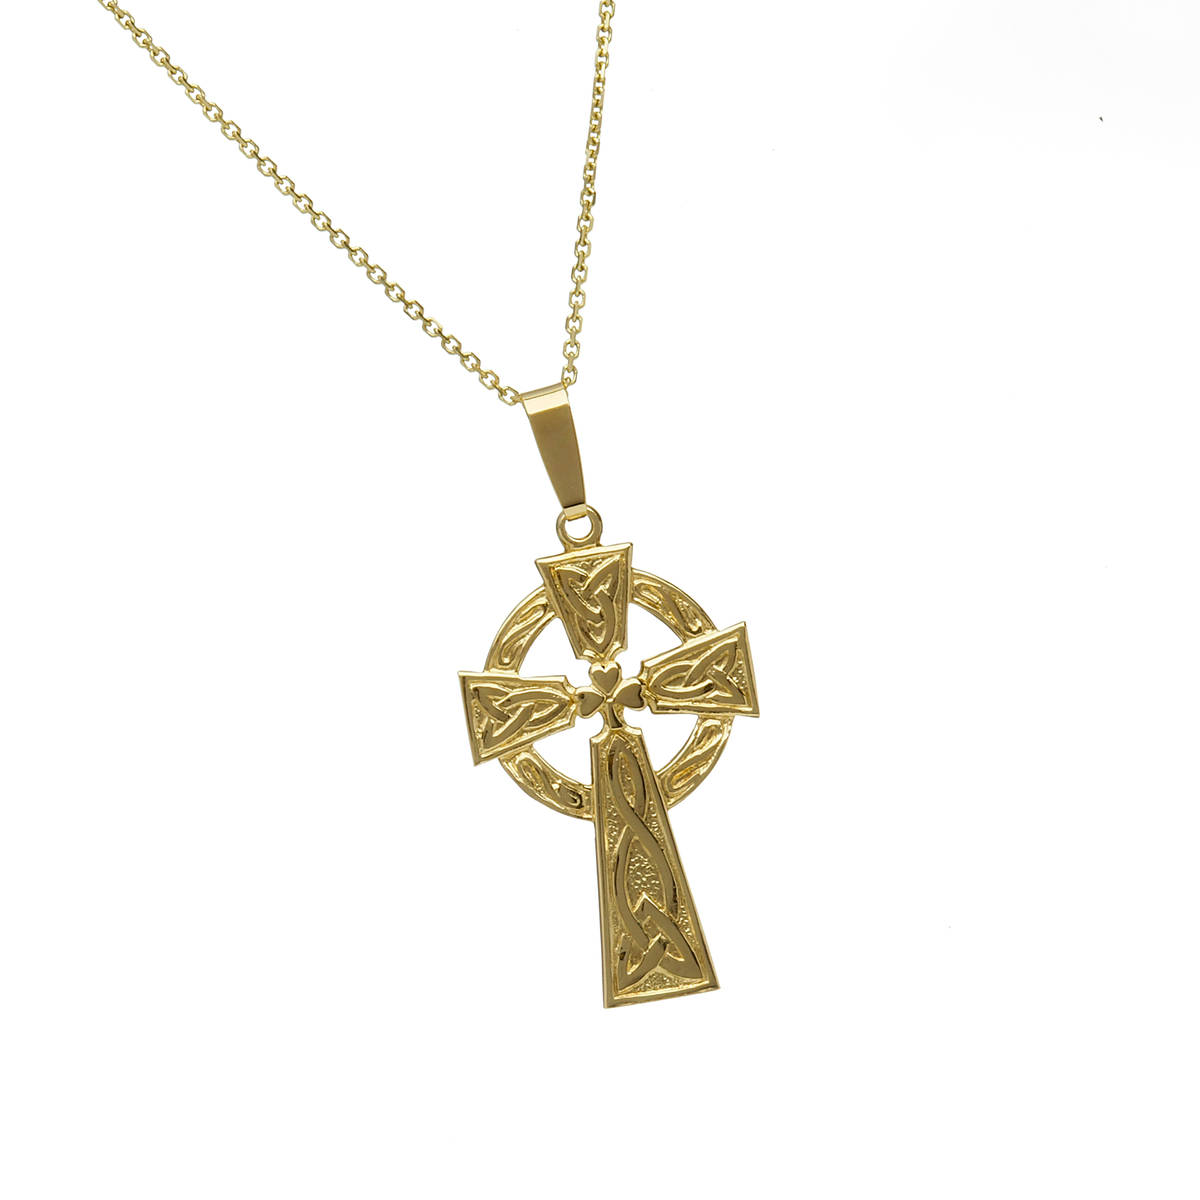 \n	10 carat yellow gold Shamrock Celtic Cross pendant with engraved back.\n	A classic Cross also available in white gold or rose gold, if you prefer.\n	Just leave a note in the comment box on checkout.